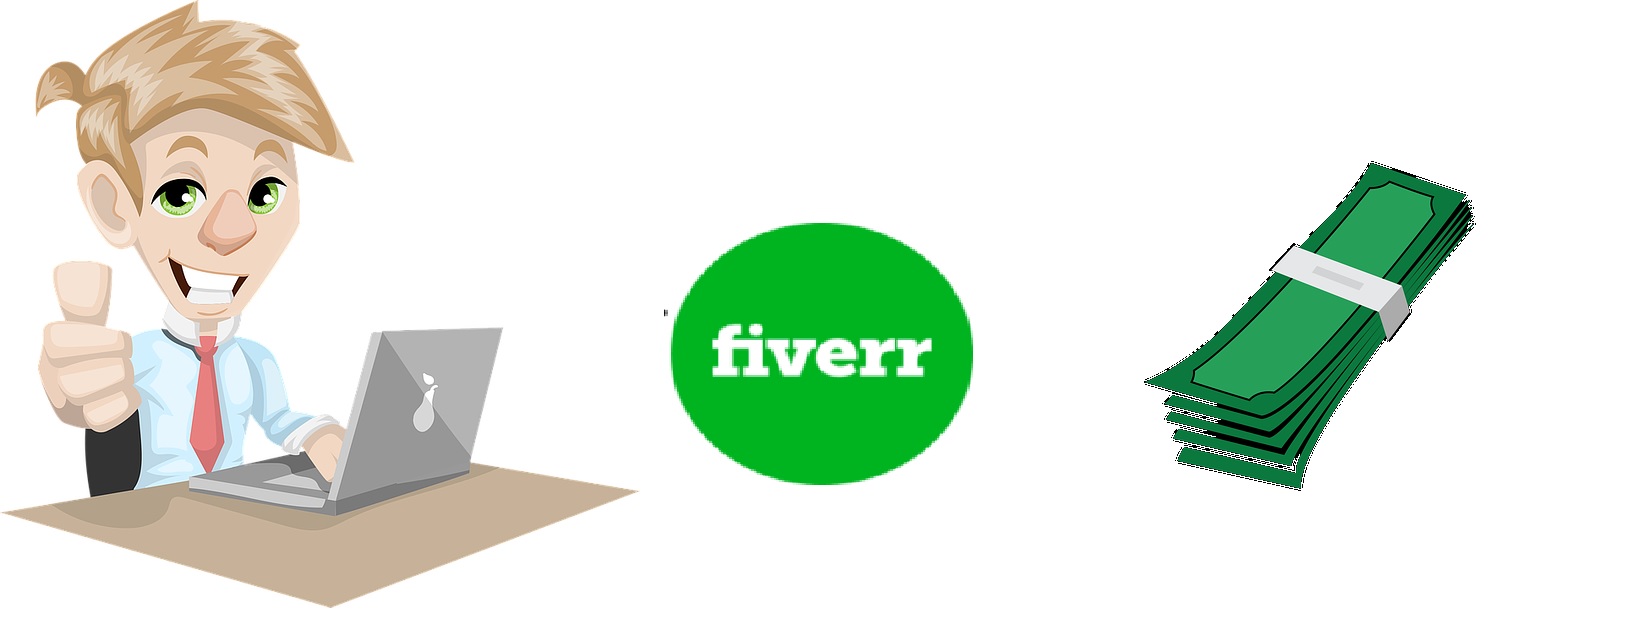 You are currently viewing <span class="dojodigital_toggle_title">How To Work With Fiverr?</span>